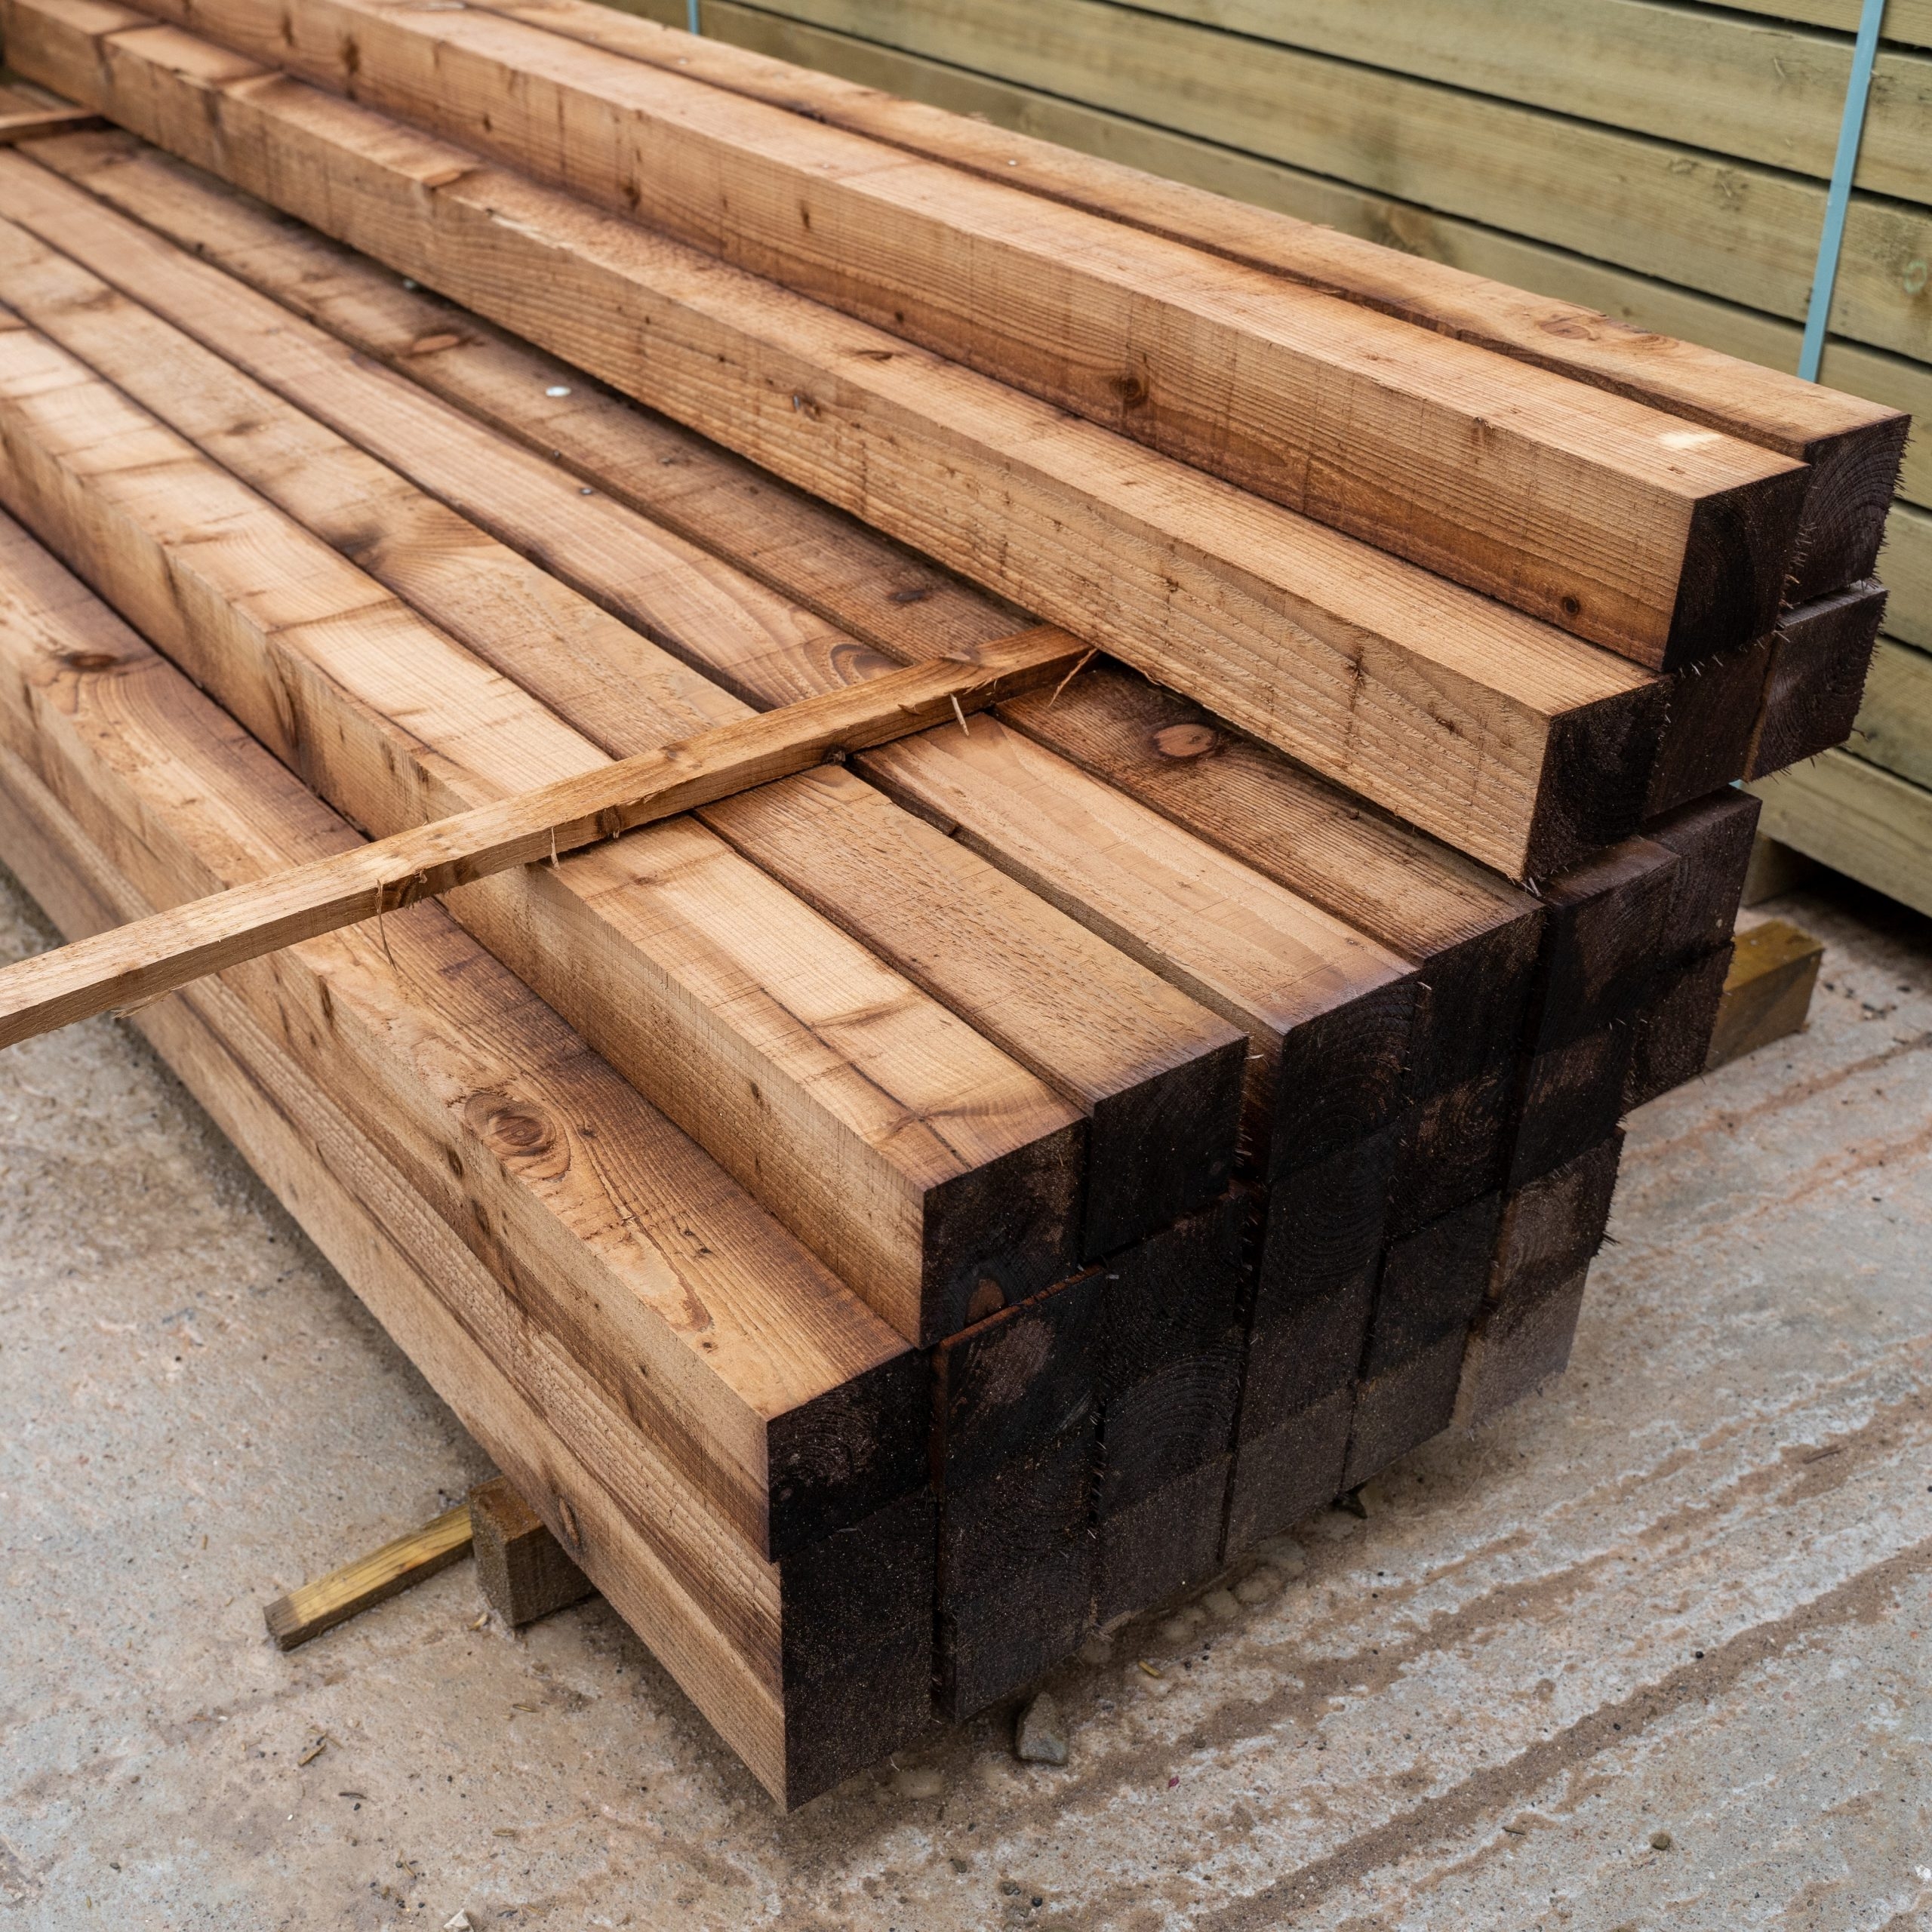 4×4 8Ft Timber Posts (100mmx100mm)